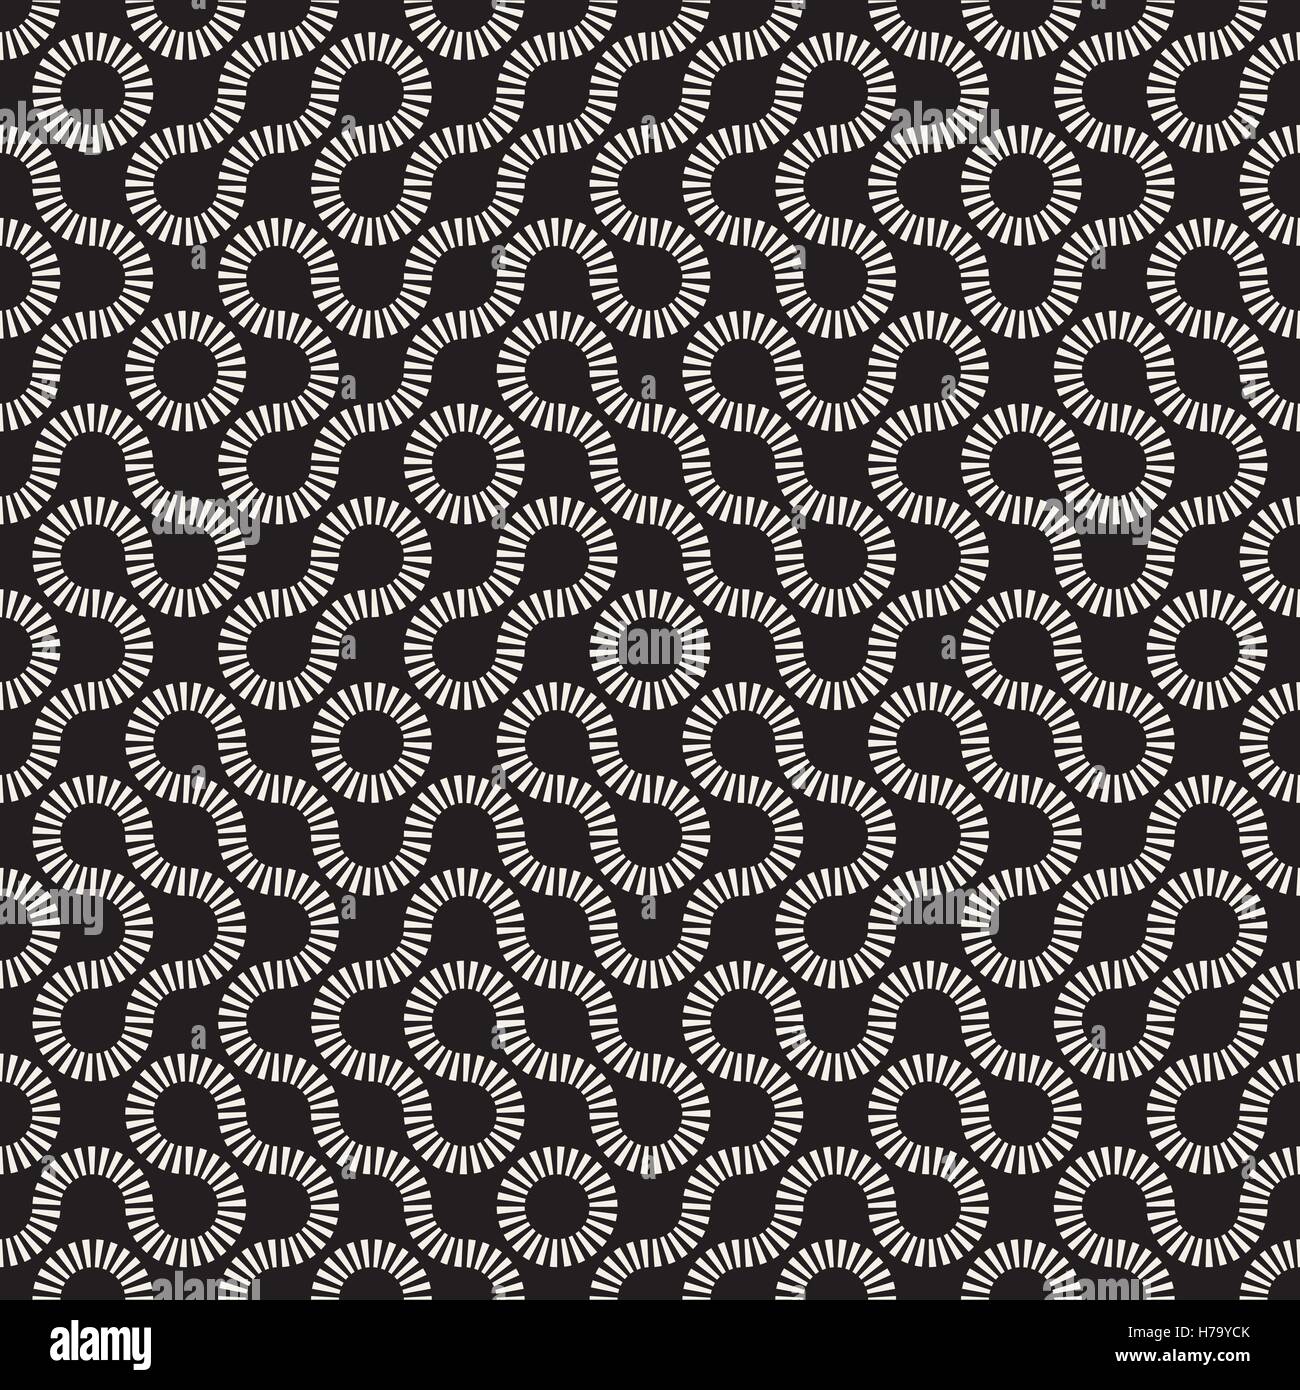 Vector Seamless Black and White Rounded Circle Maze Dash Line Truchet Pattern Stock Vector